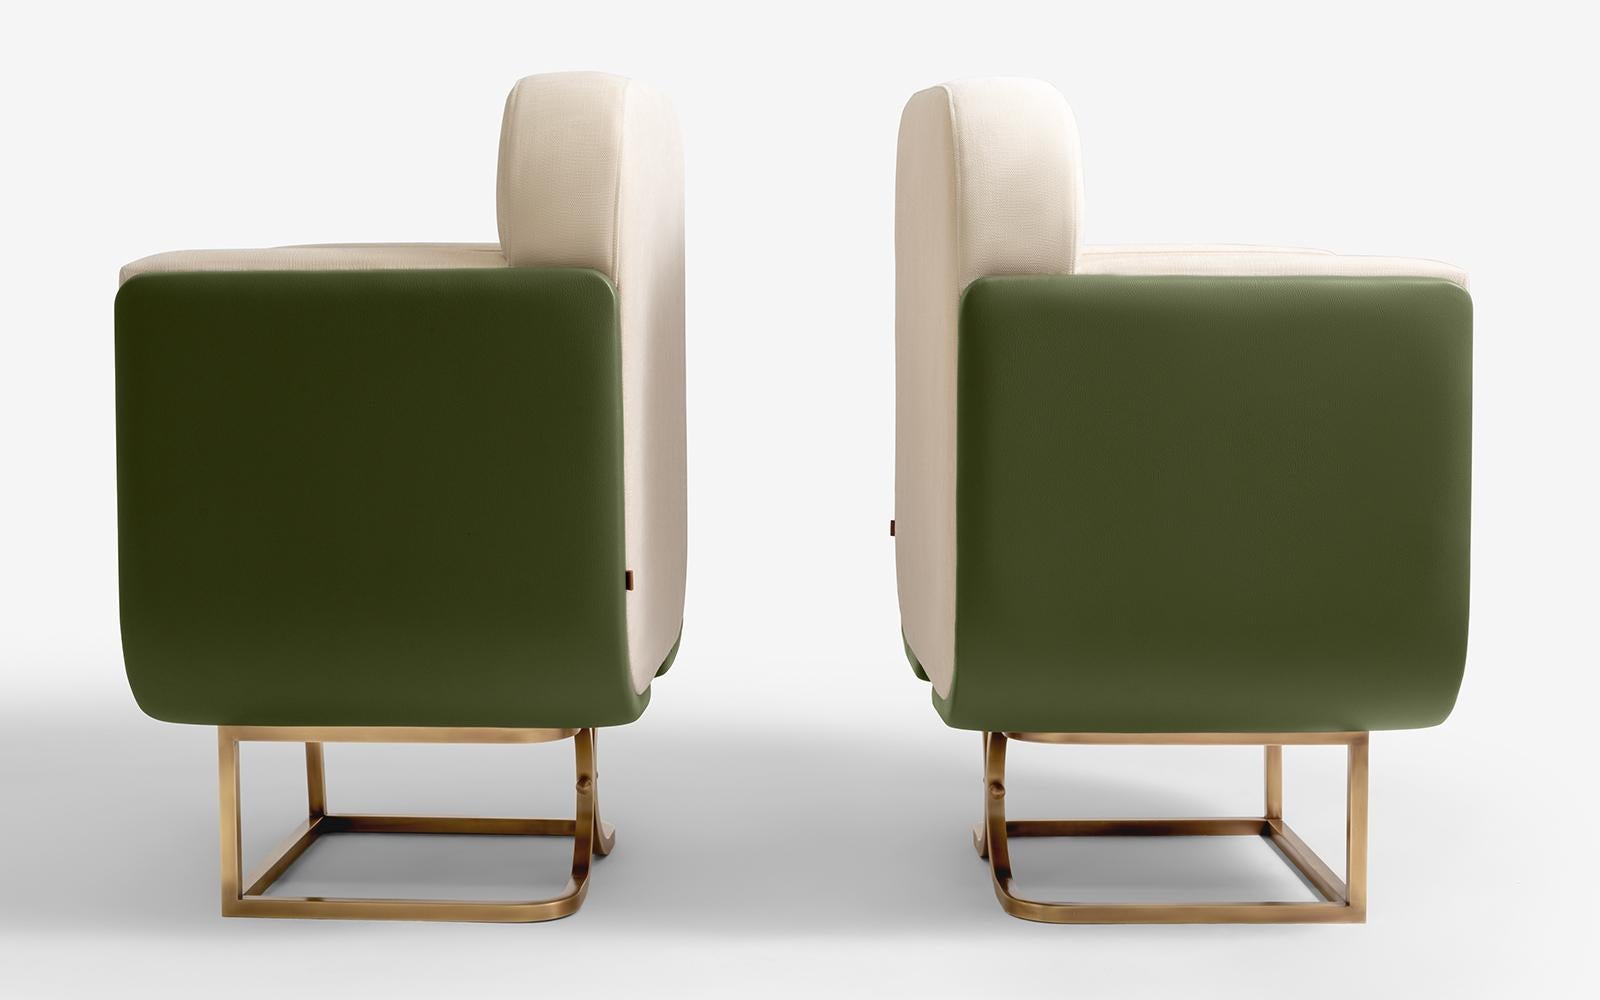 Turkish Up Green Brass &Fux Leather Chair For Sale